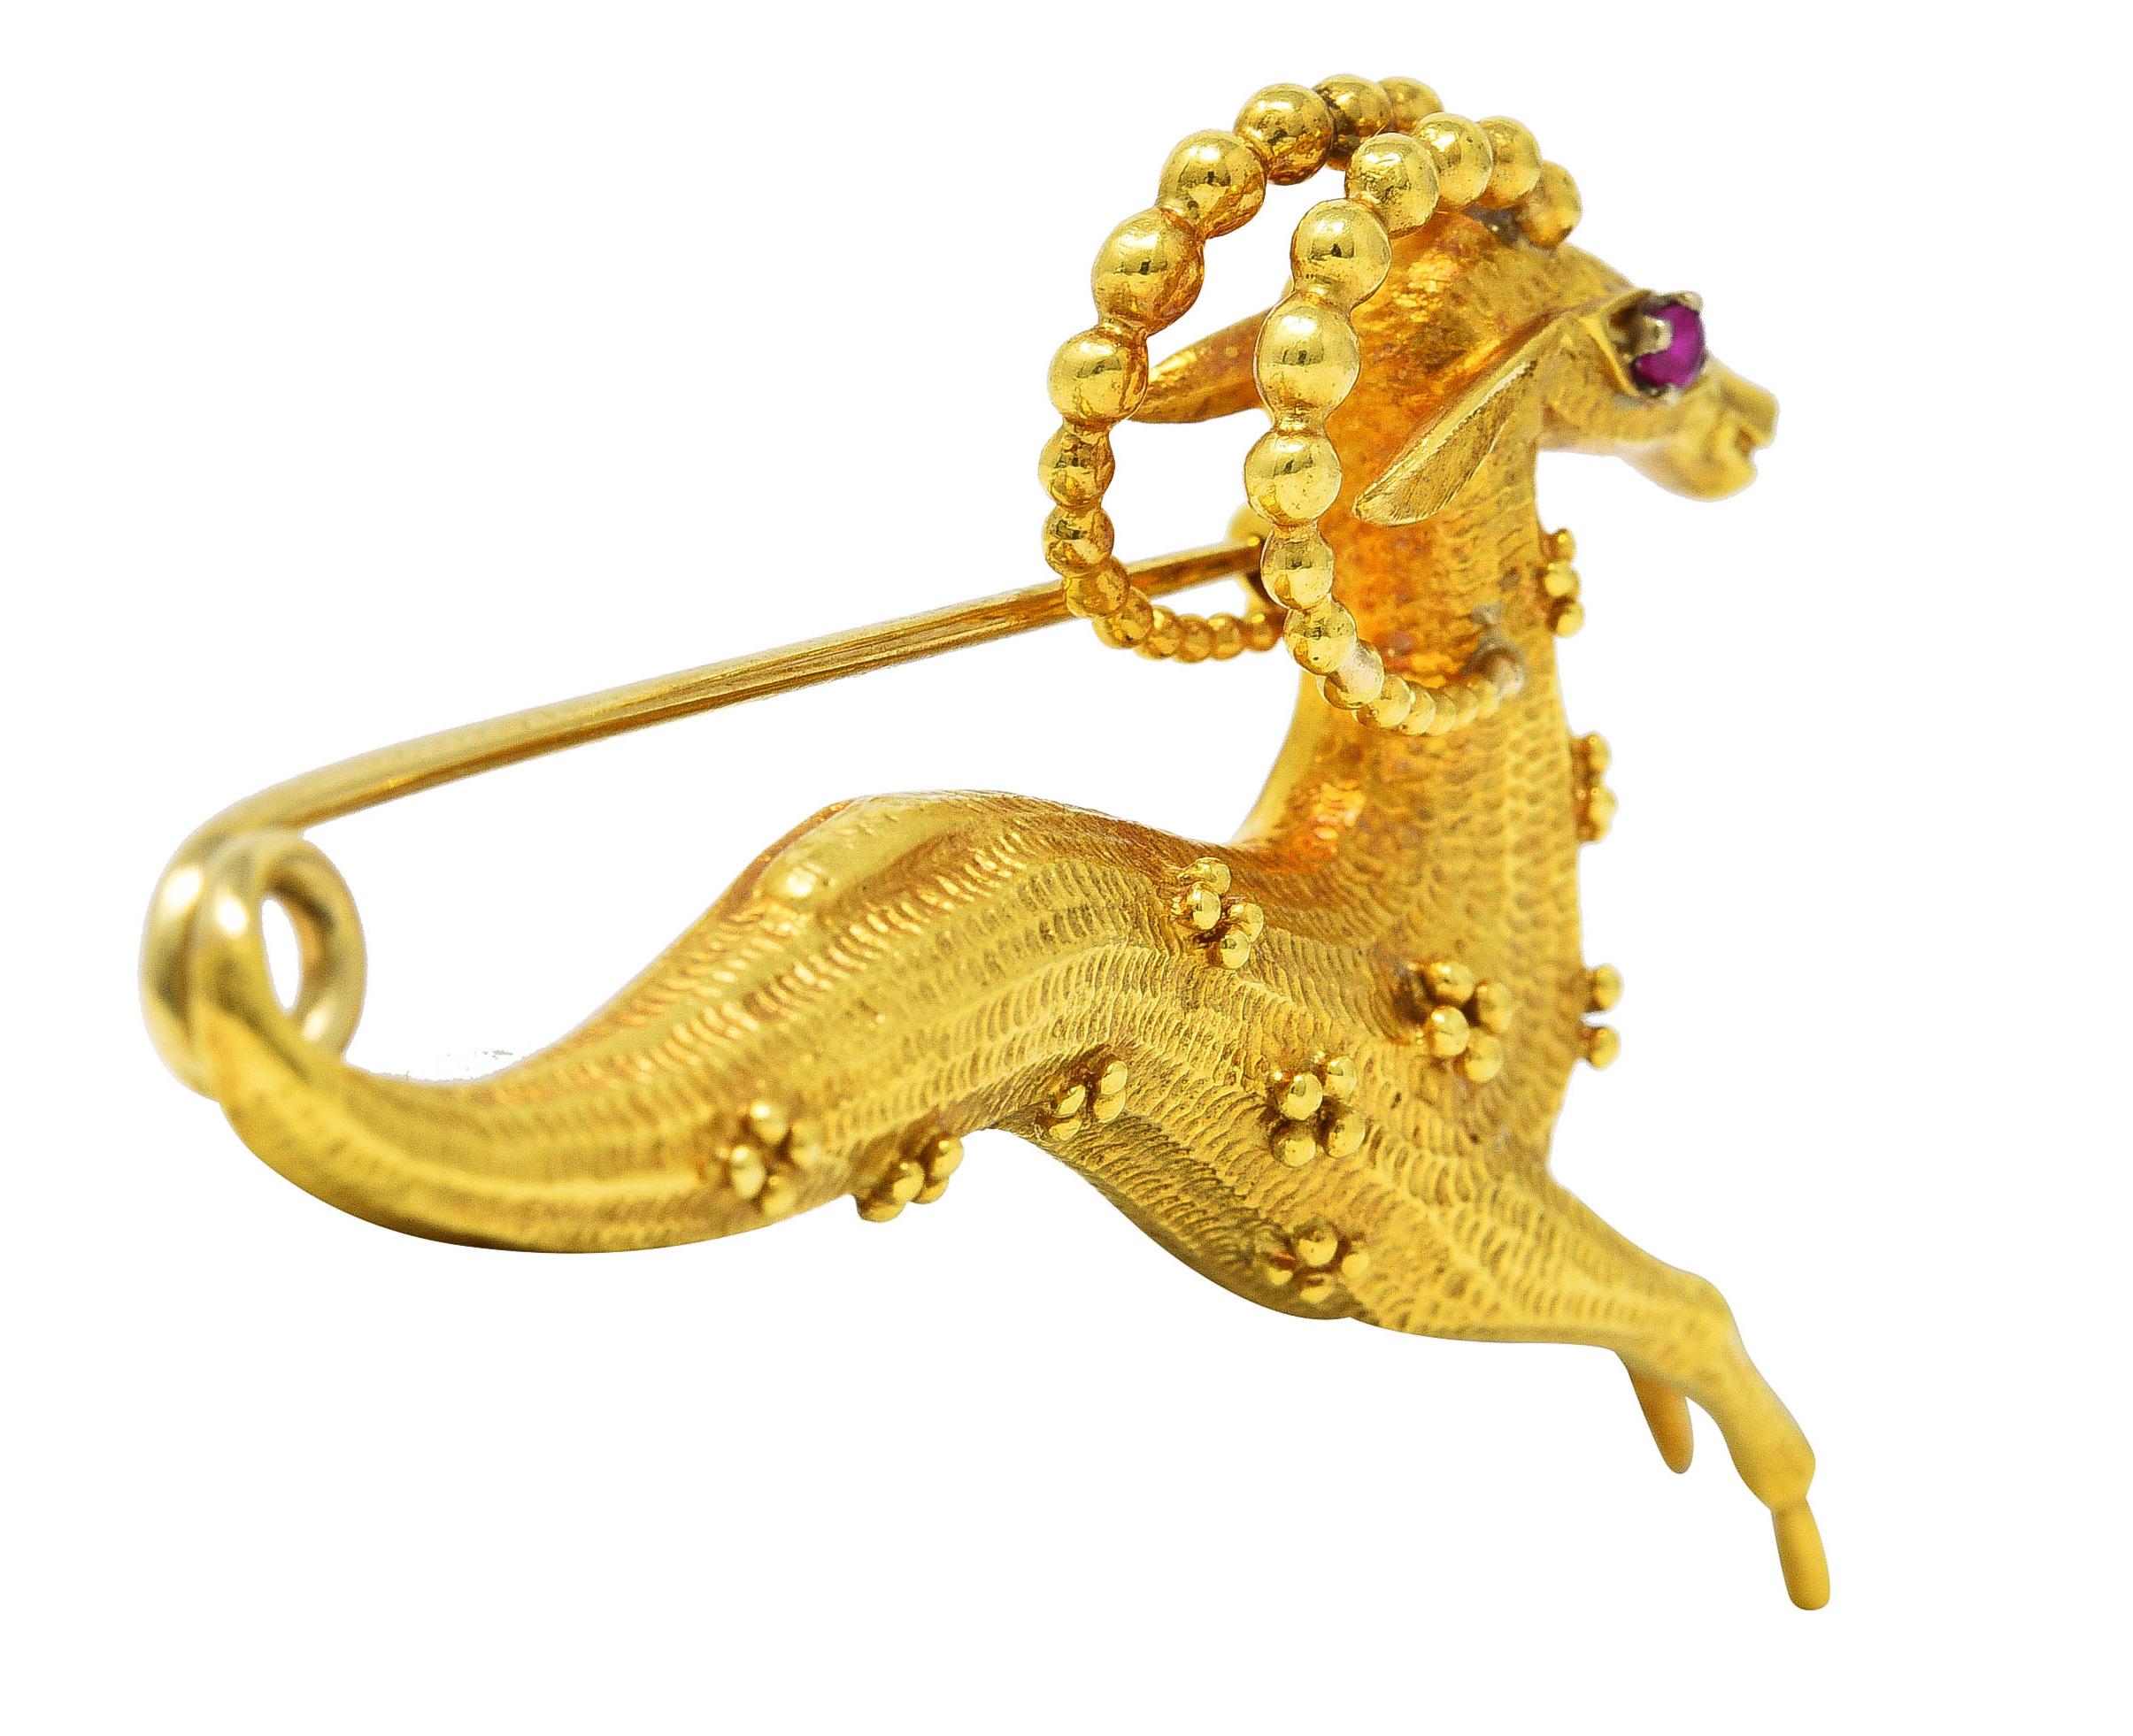 Brooch is designed as a stylized leaping gazelle with grooved textured body. Featuring notched curling horns and gold granulation throughout. Accented by a prong set round cut ruby eye - transparent medium red in color. Rear of body curls into